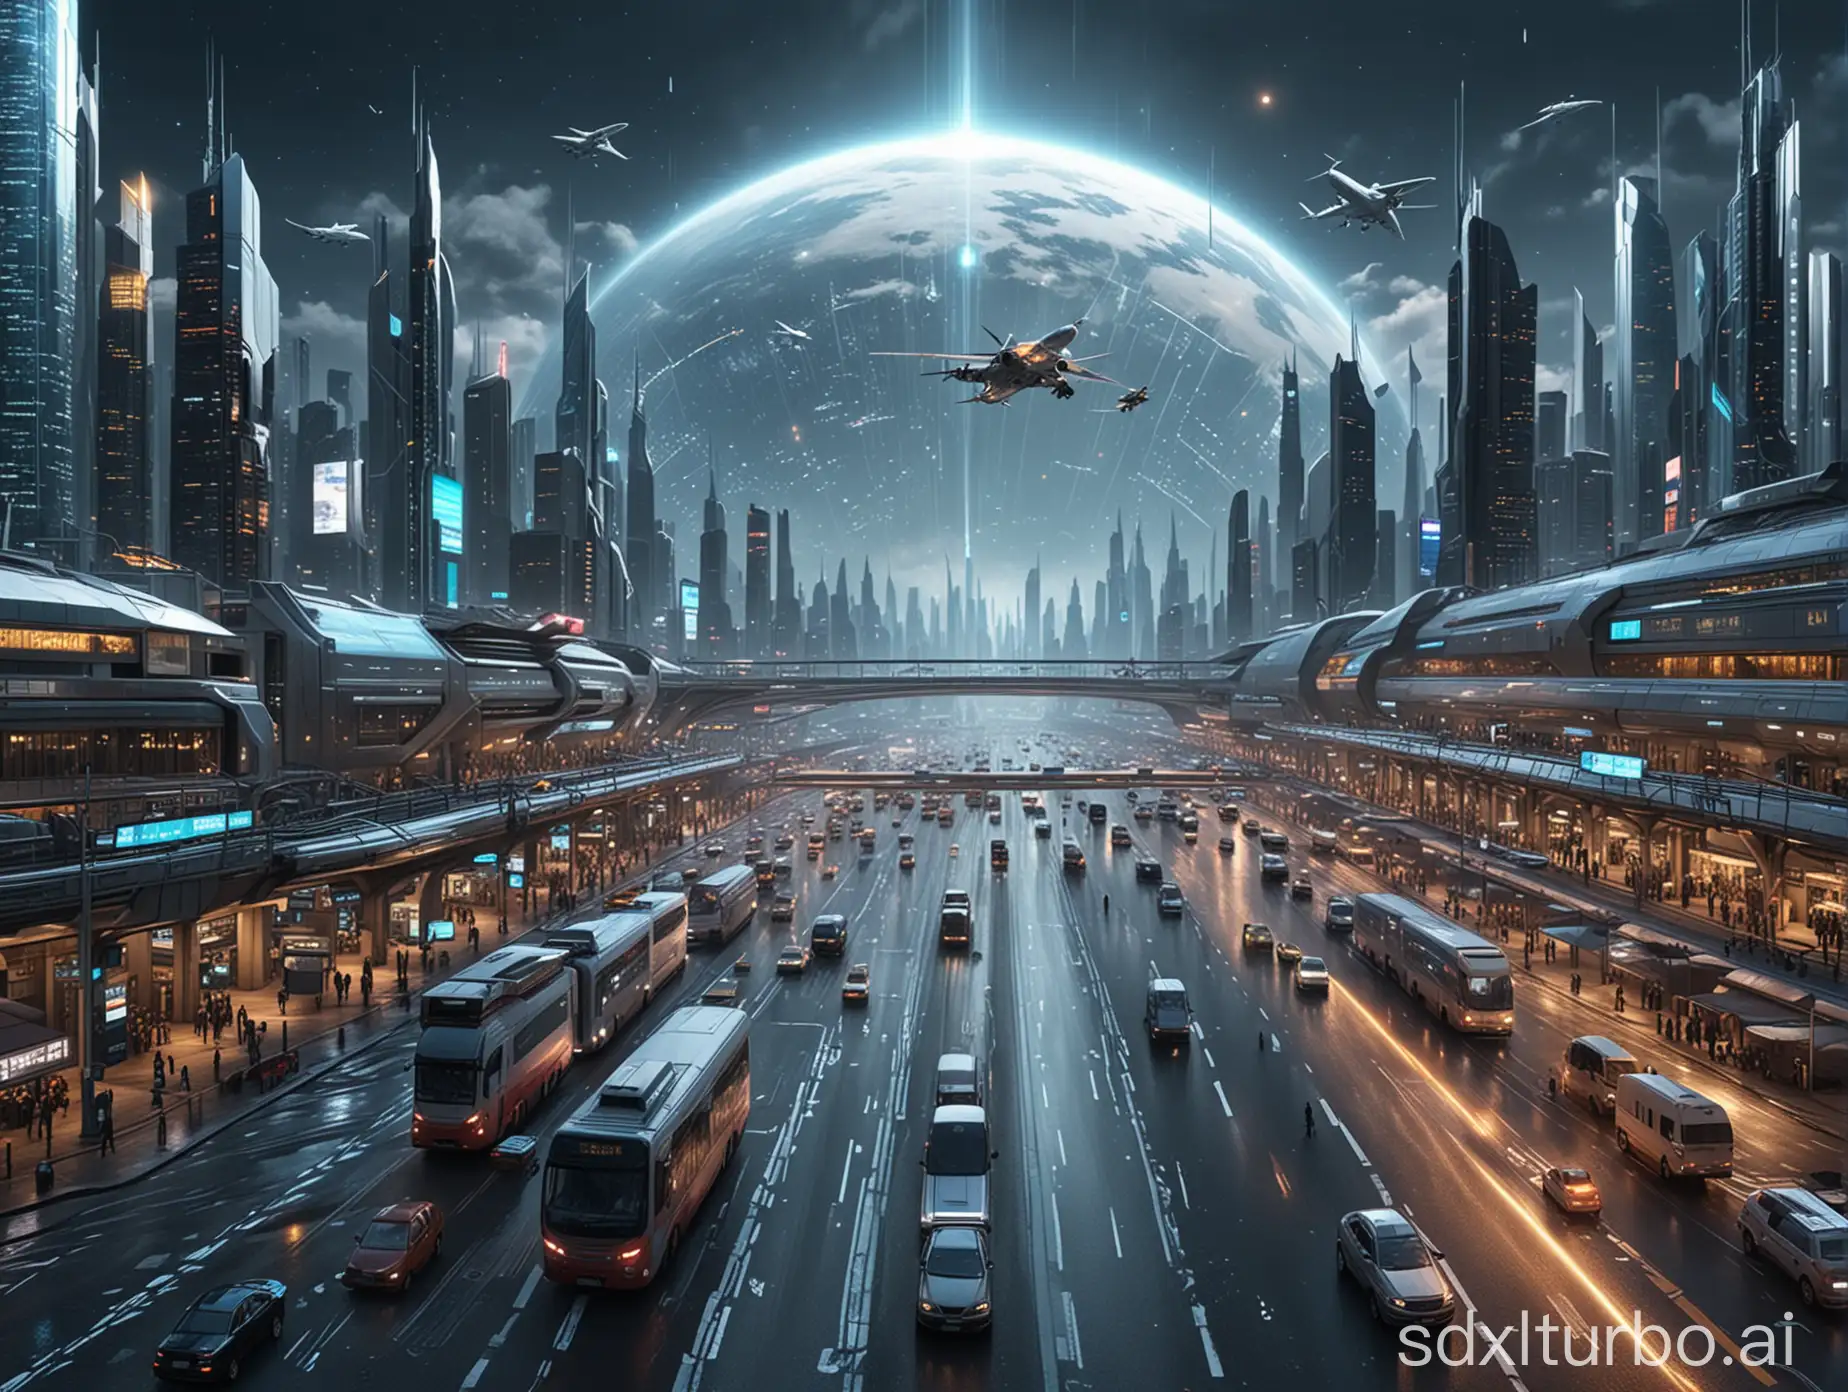 Sci-fi city, holographic projection, showing real-time traffic information and weather forecast of the city, civil aviation transportation, 8k ultra wide-angle, high resolution, high detail, aspect ratio 16:9, realistic style